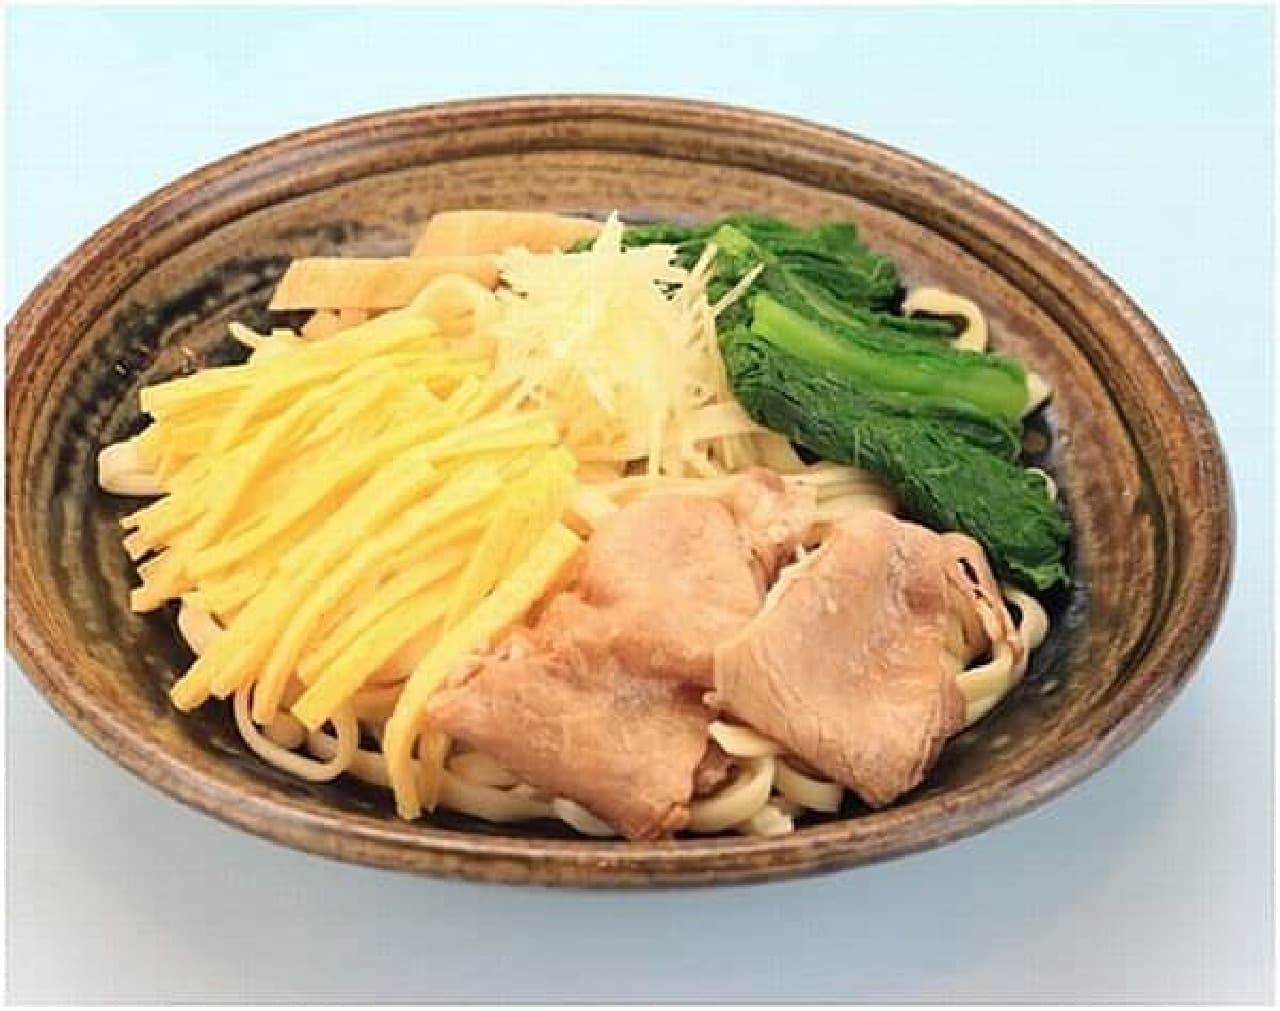 "Chilled Okinawa soba" A chilled menu perfect for summer!